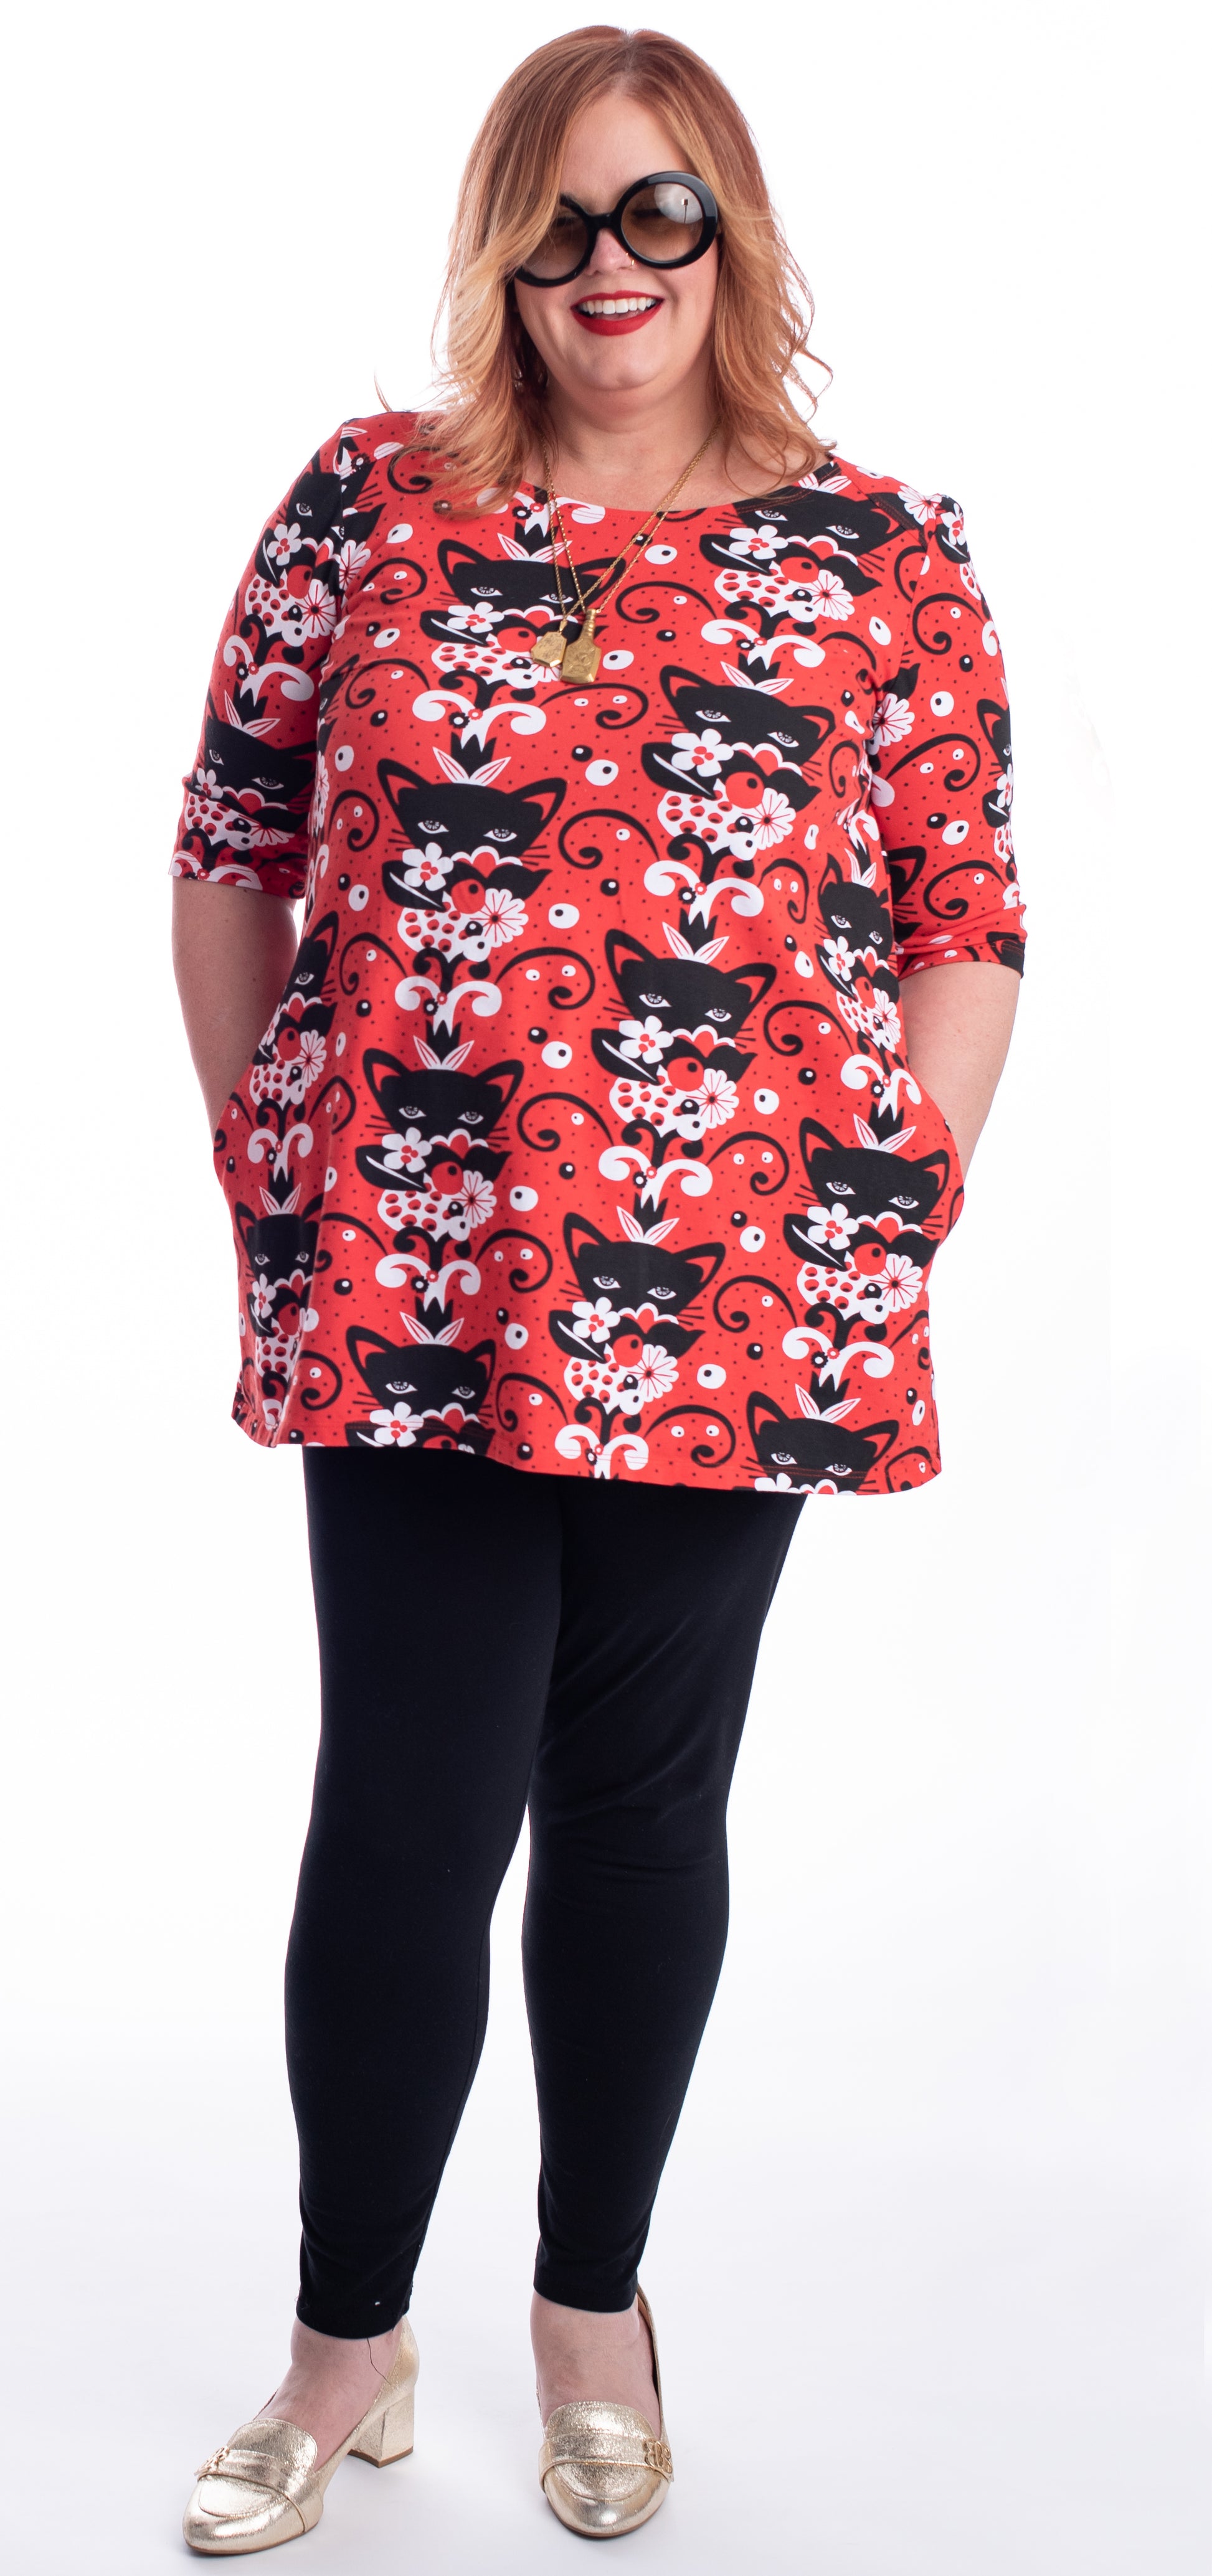 Red black and white a-line pocket tunic with  print of cats and flowers on model, full body view